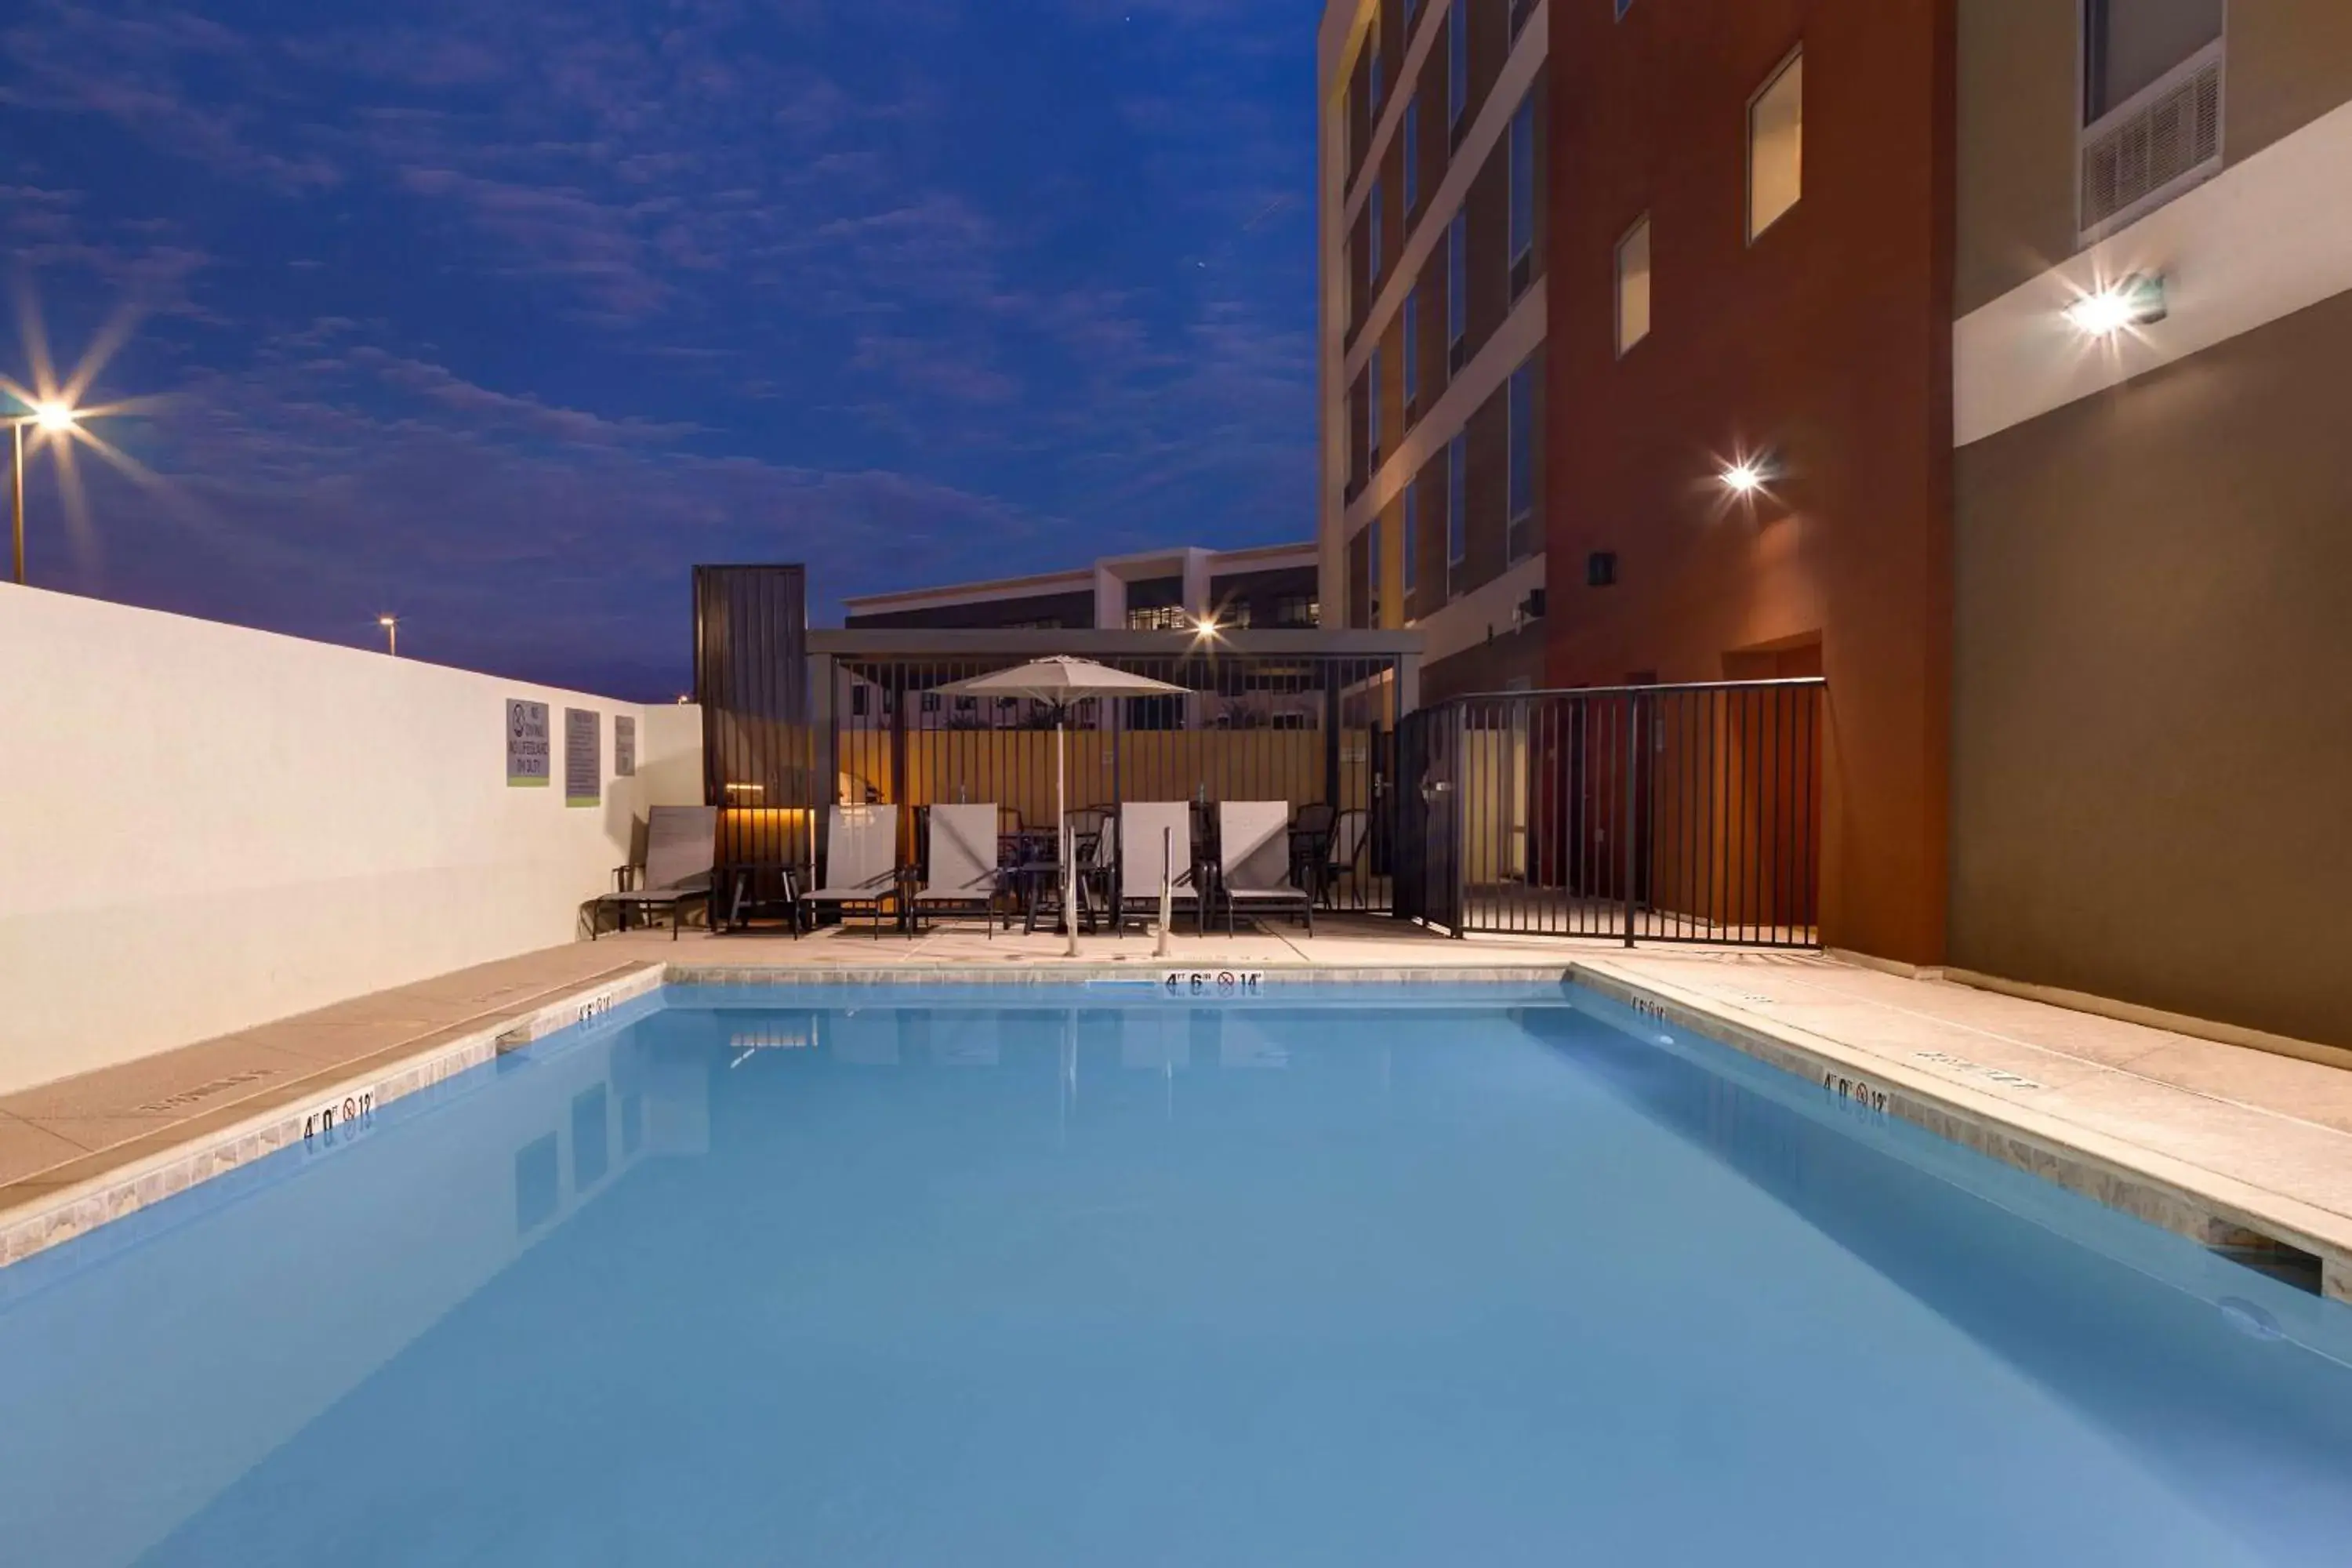 Pool view, Swimming Pool in Home2 Suites By Hilton Las Vegas Southwest I-215 Curve